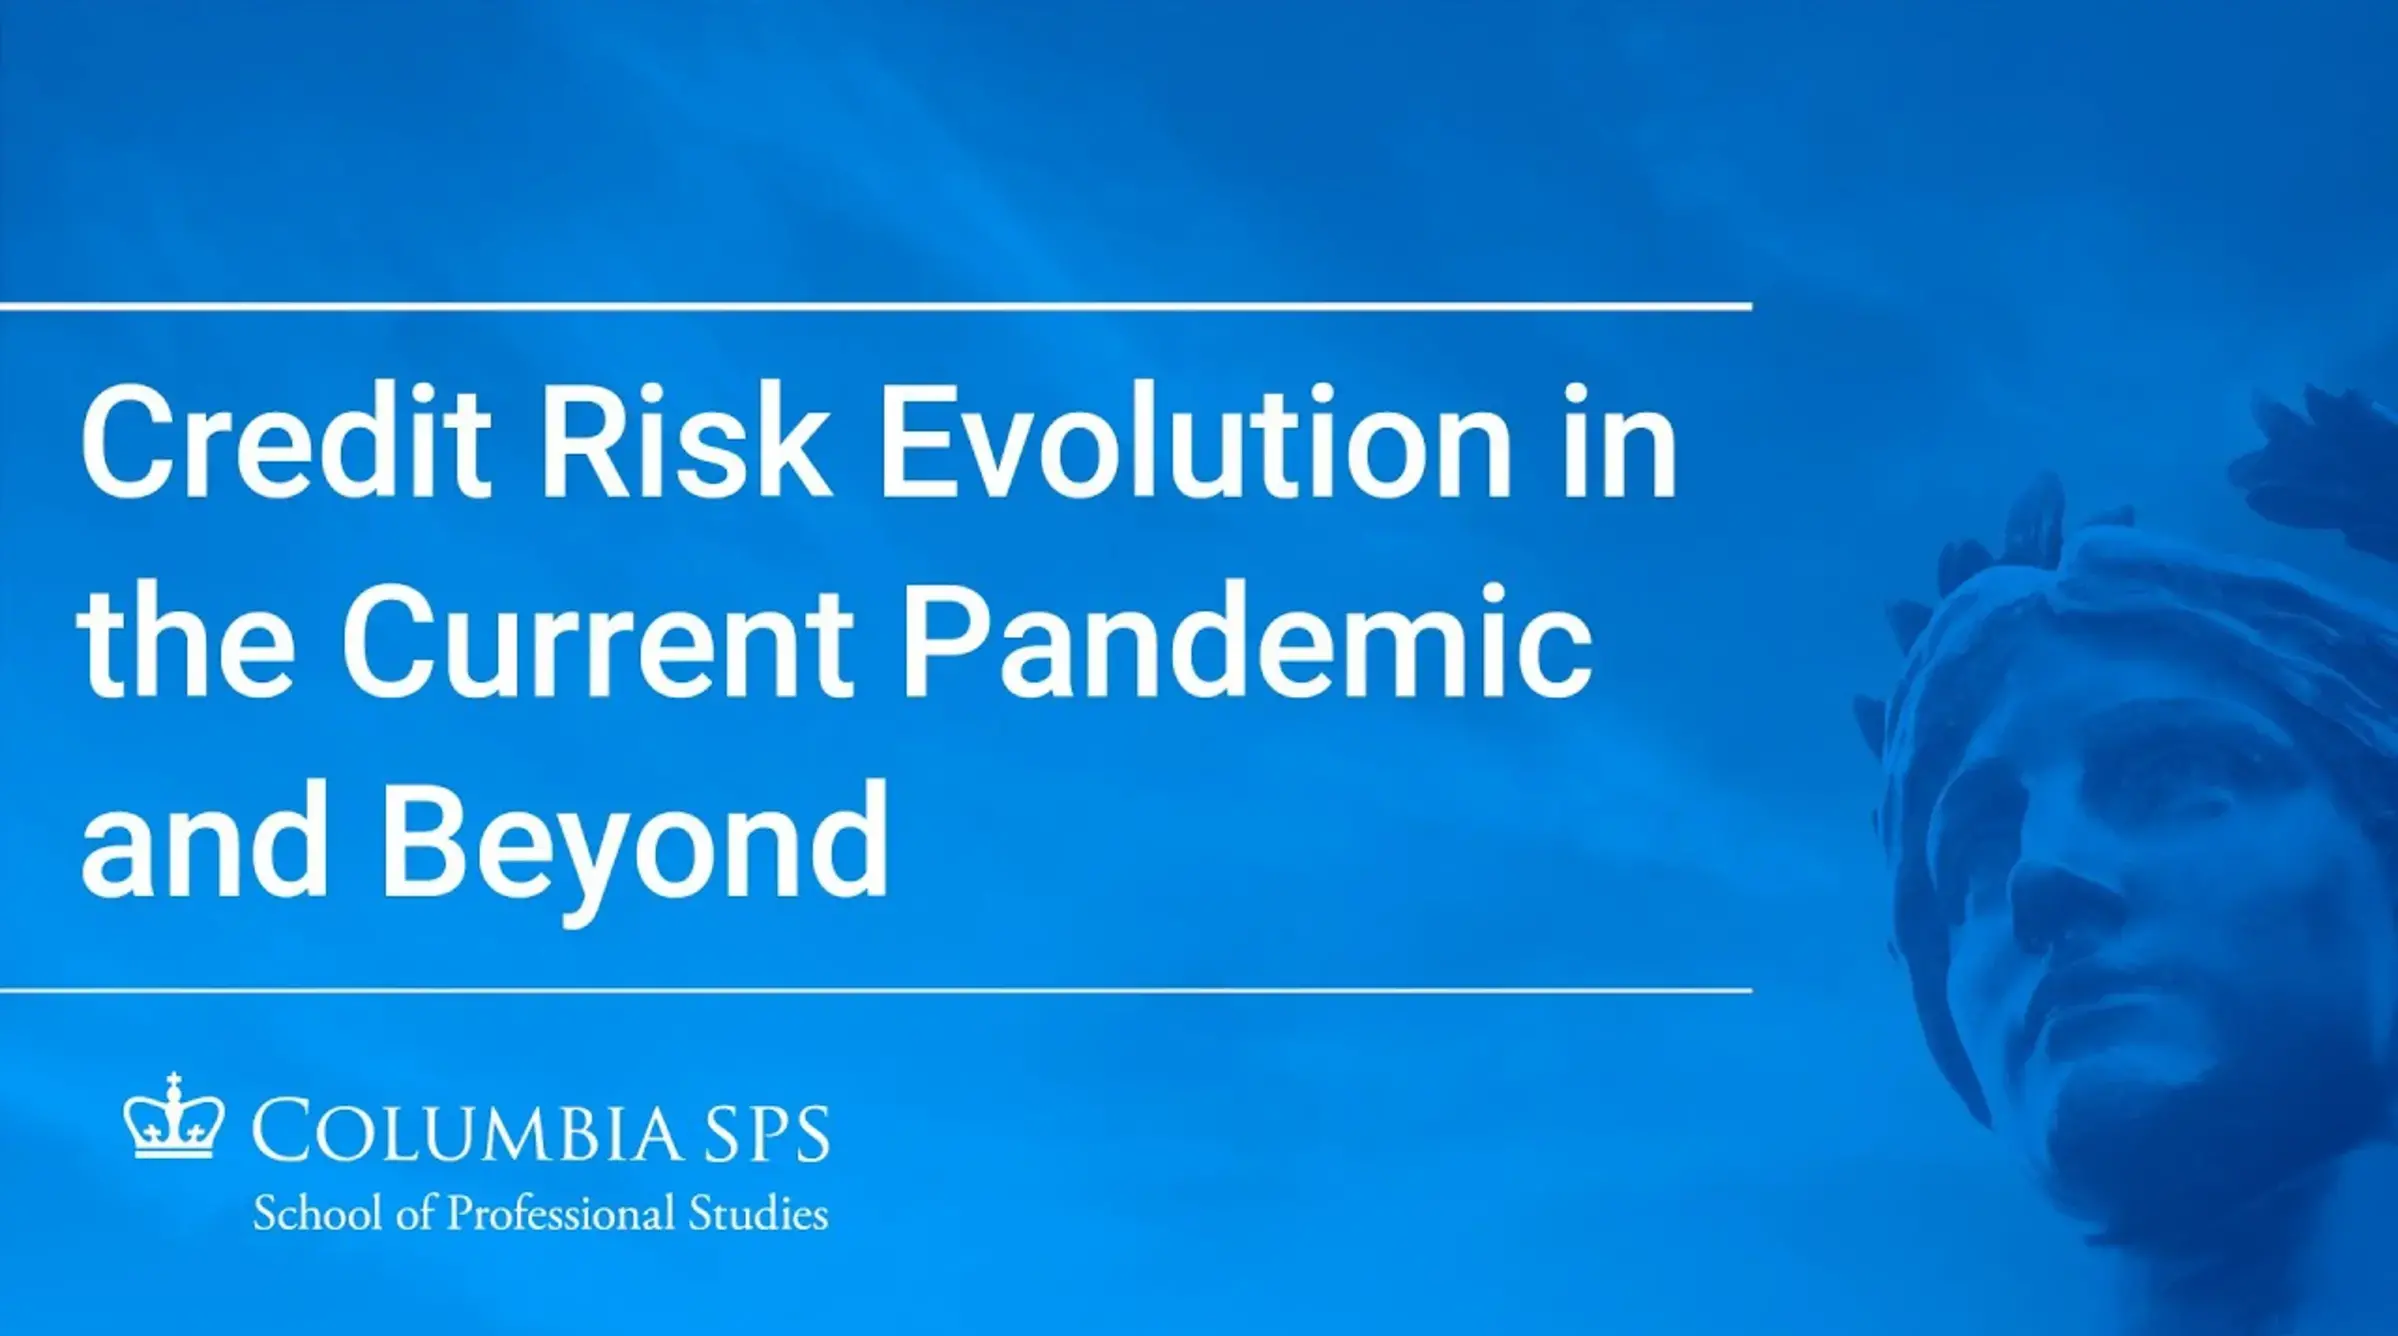 Video - Credit Risk Evolution in the Current Pandemic and Beyond